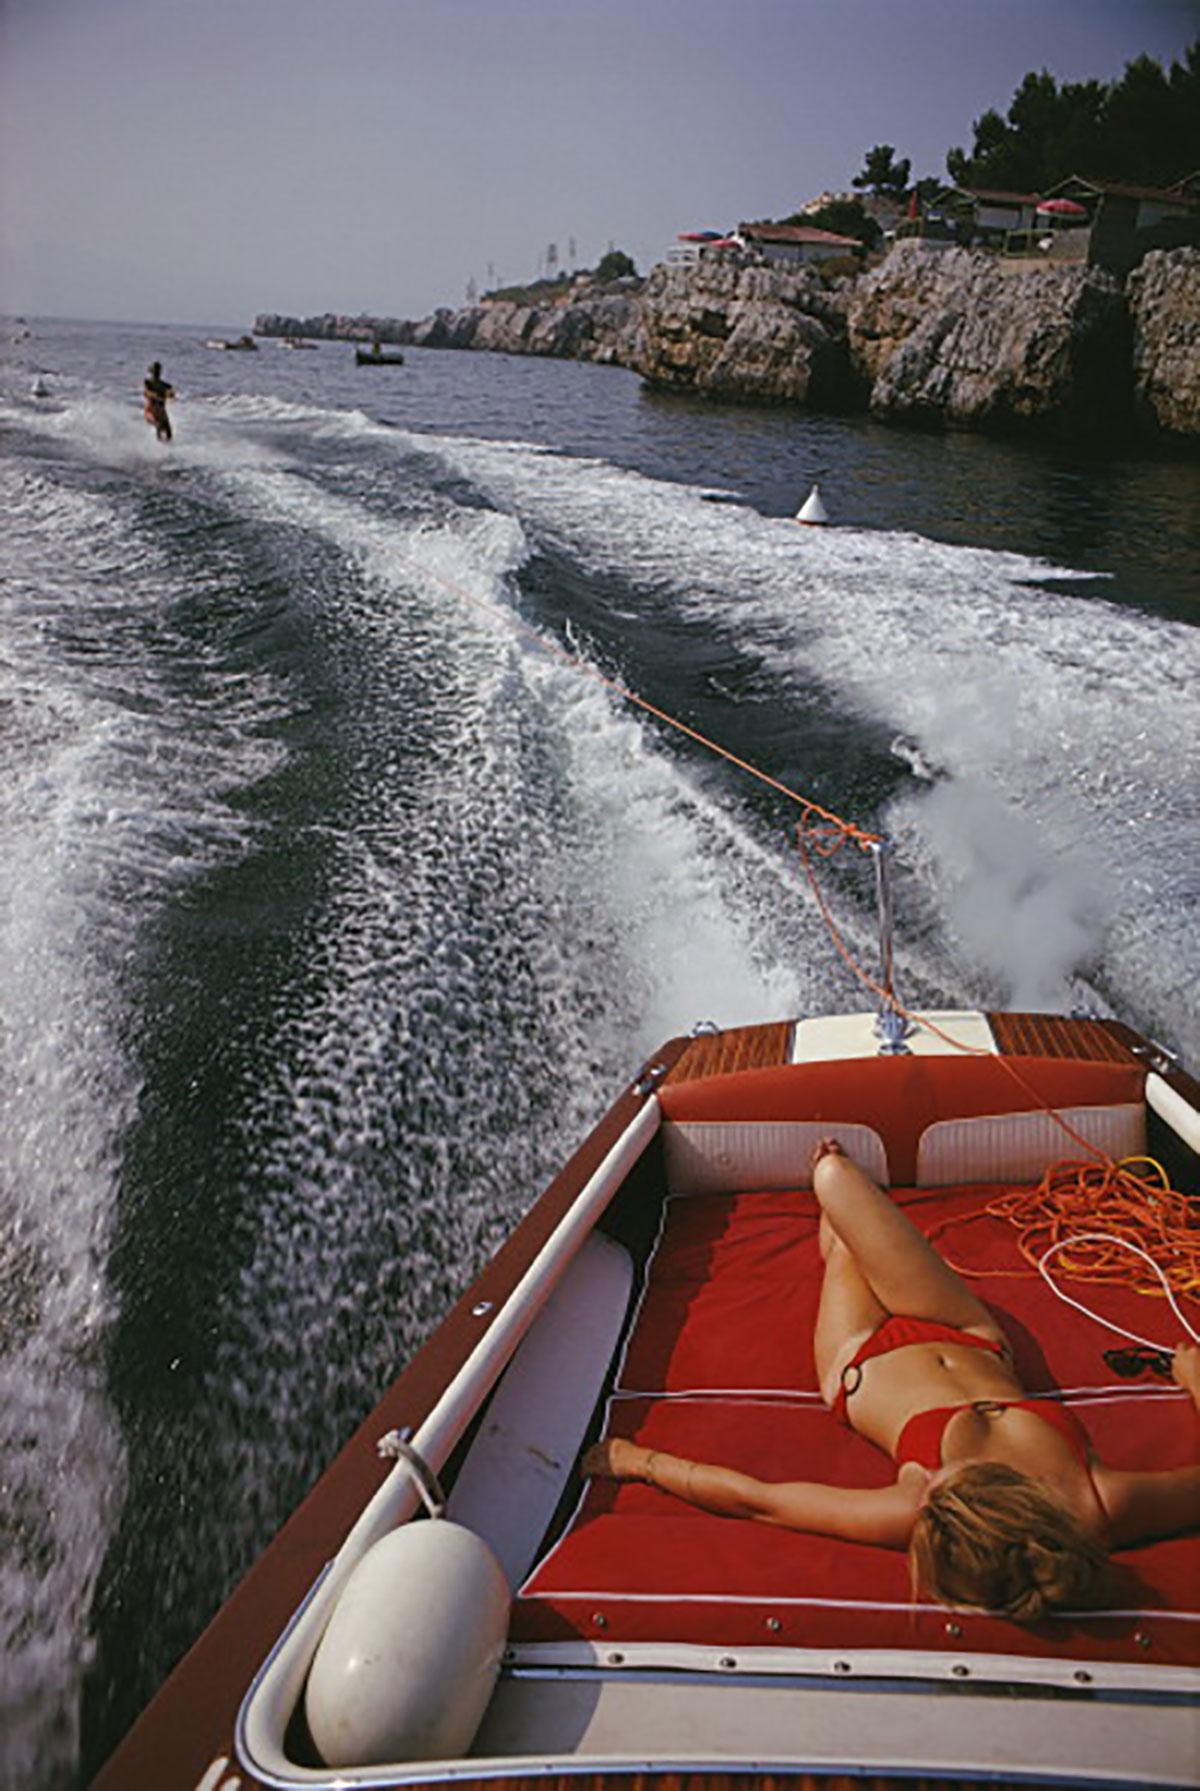 Slim Aarons
Leisure In Antibes
1964 (printed later)
C print 
Estate stamped and numbered edition of 150 
with Certificate of authenticity

A woman sunbathing in a motorboat as it tows a waterskiier, in the sea off the Hotel du Cap-Eden-Roc in